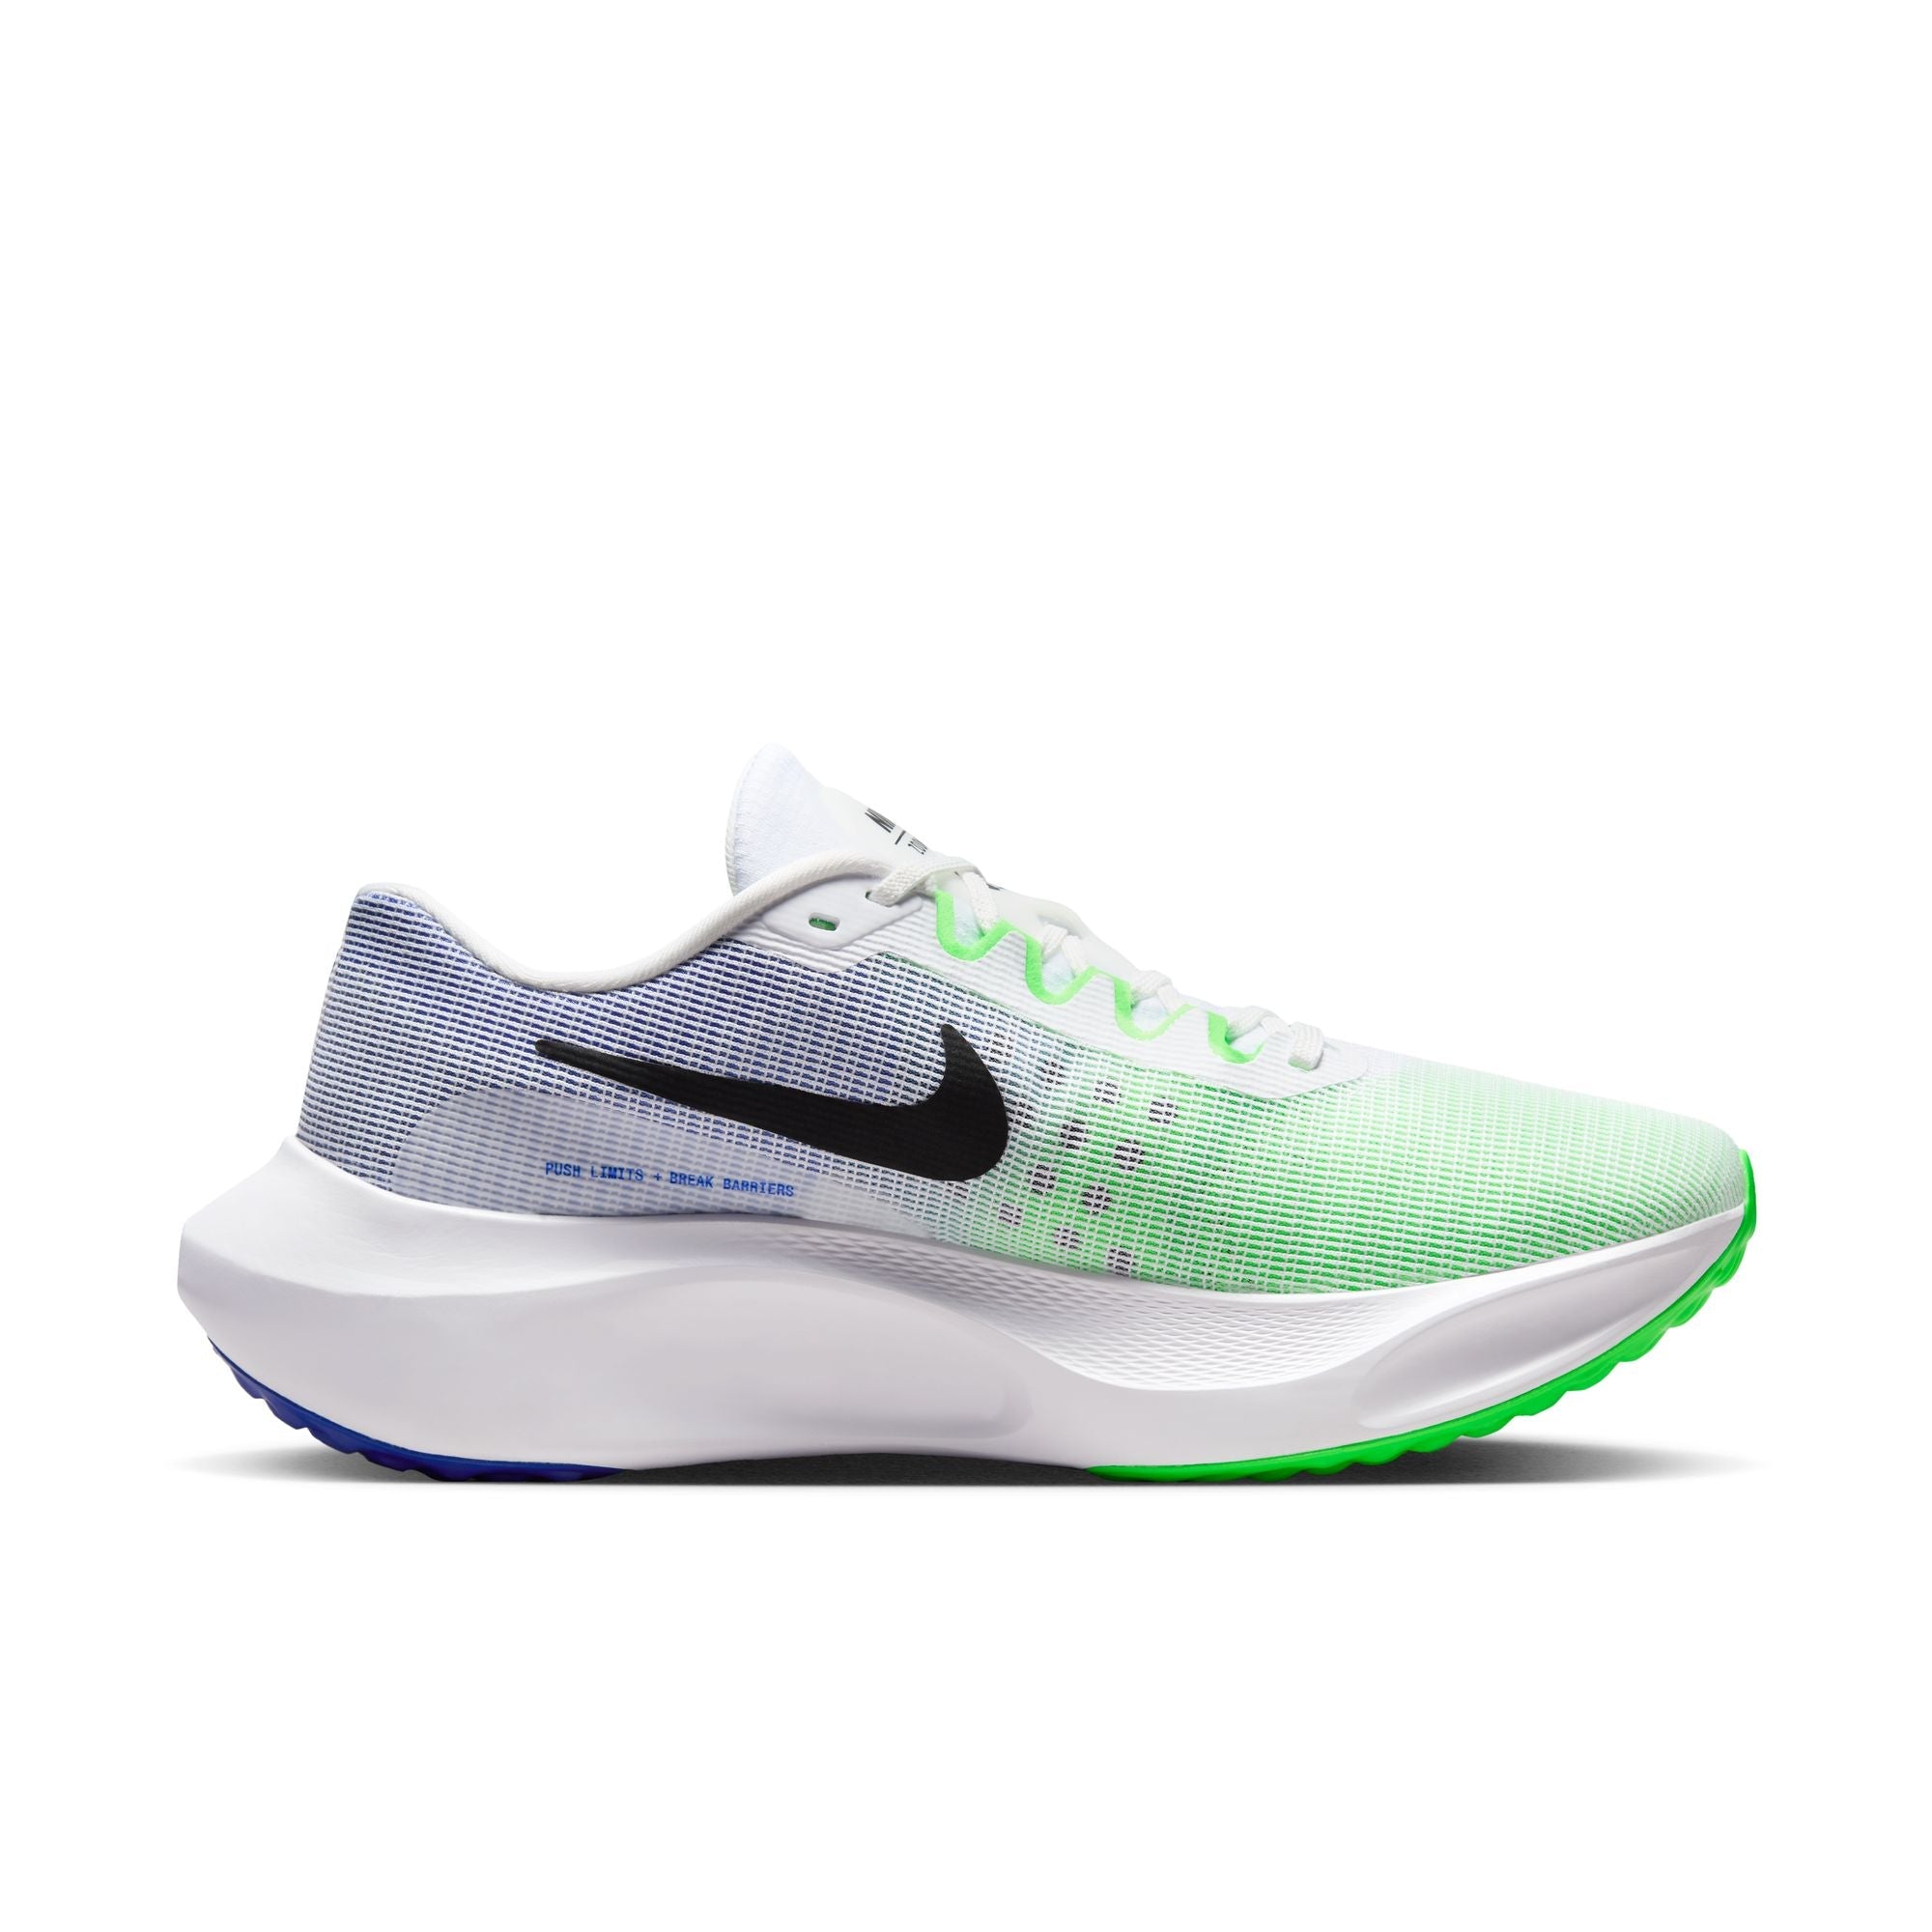 NIKE ZOOM FLY 5 DM8968-101 RUNNING SHOES (M)